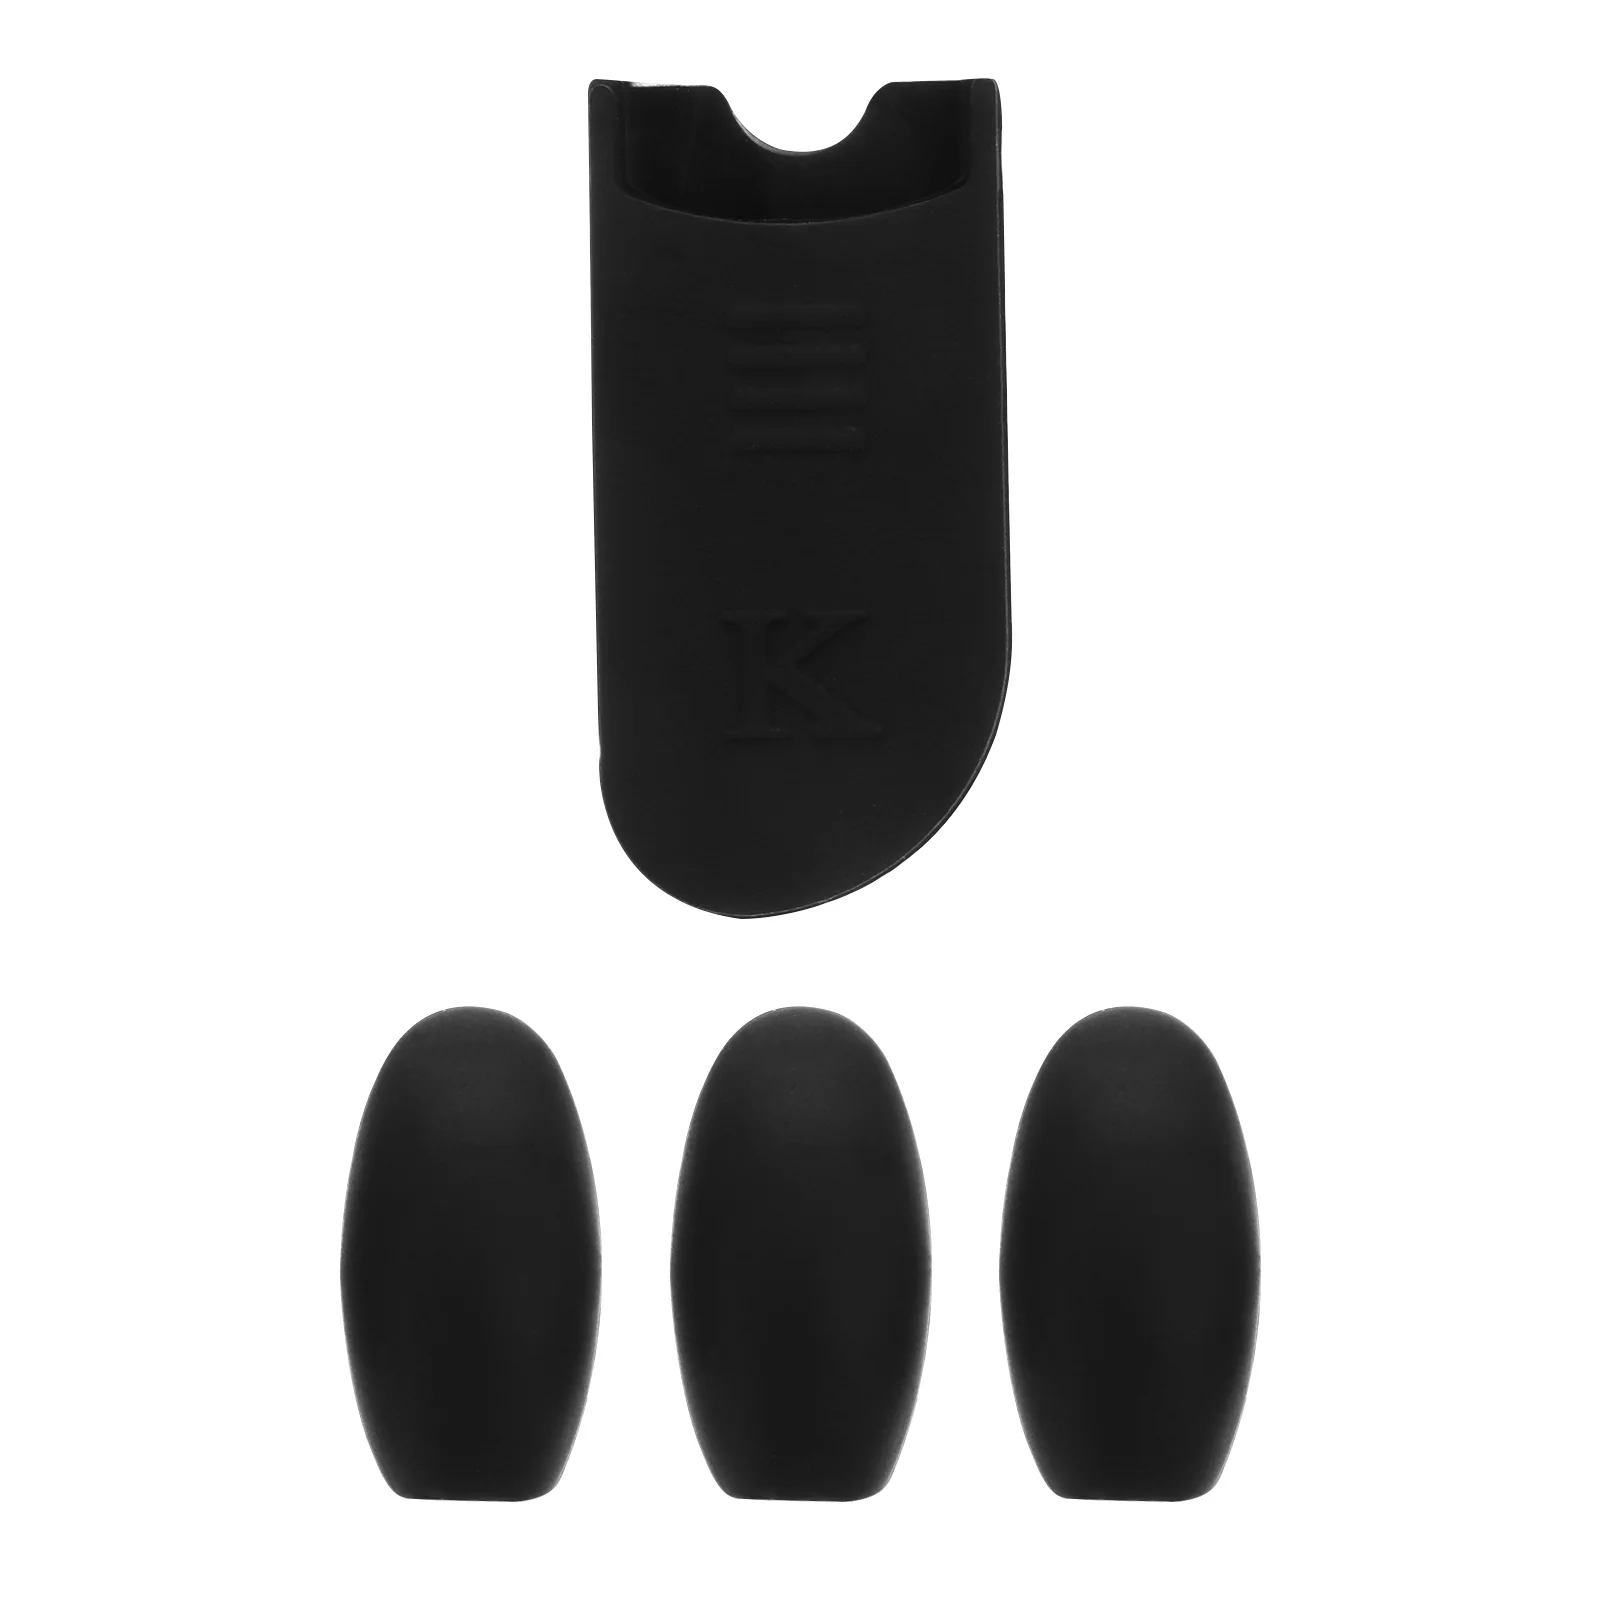 

Thumb Rest Clarinet Pad Saxophone Sax Wind Cushion Silicone Instruments Accessories Finger Cushions Protector Rubber Palm Key